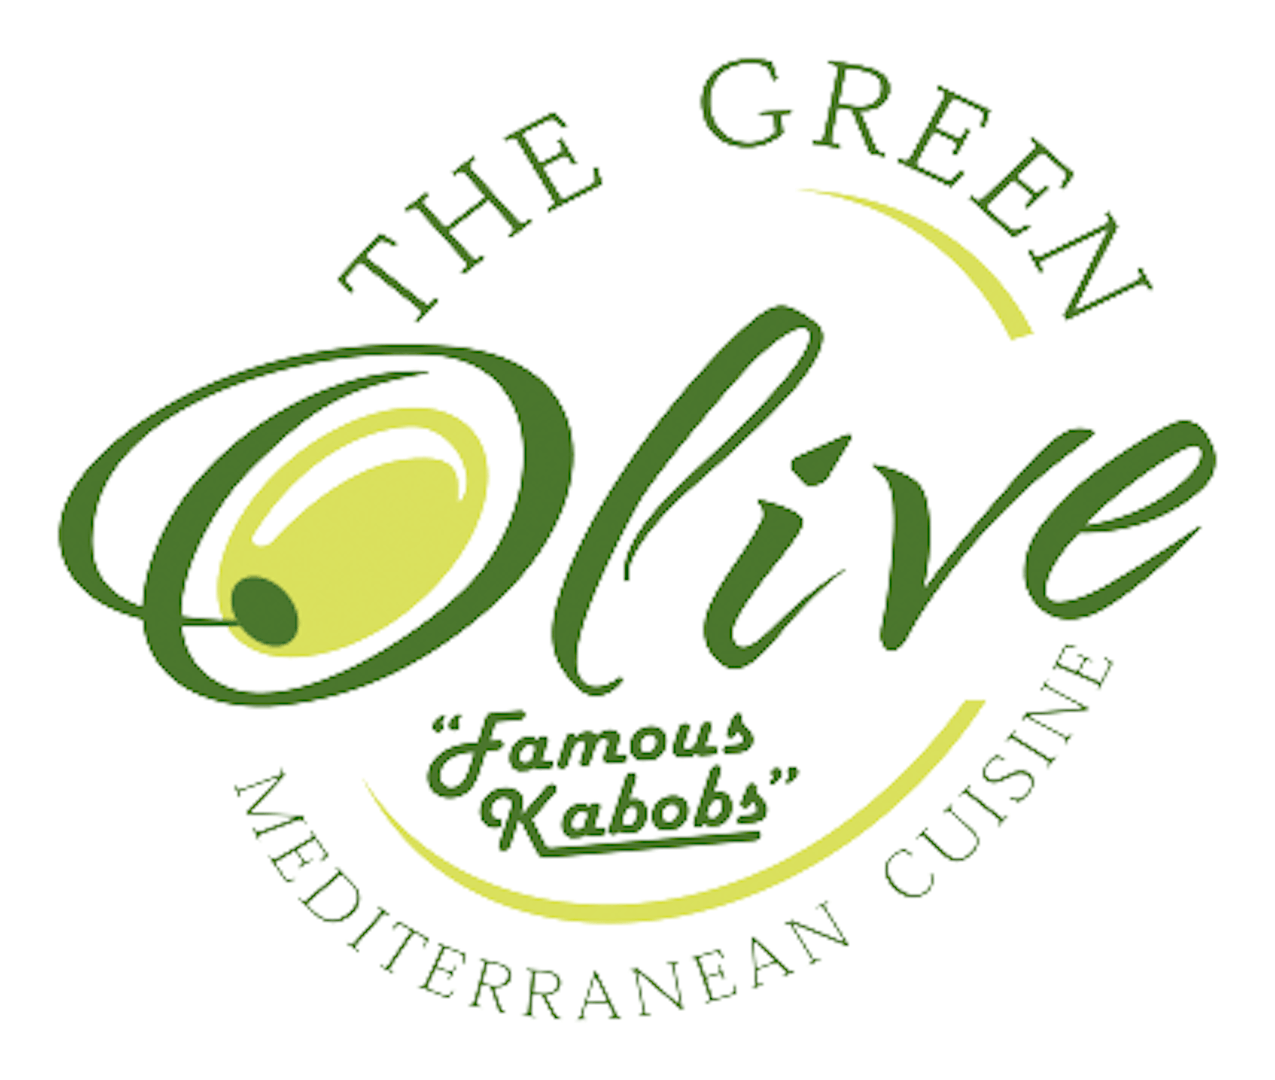 The Green Olive